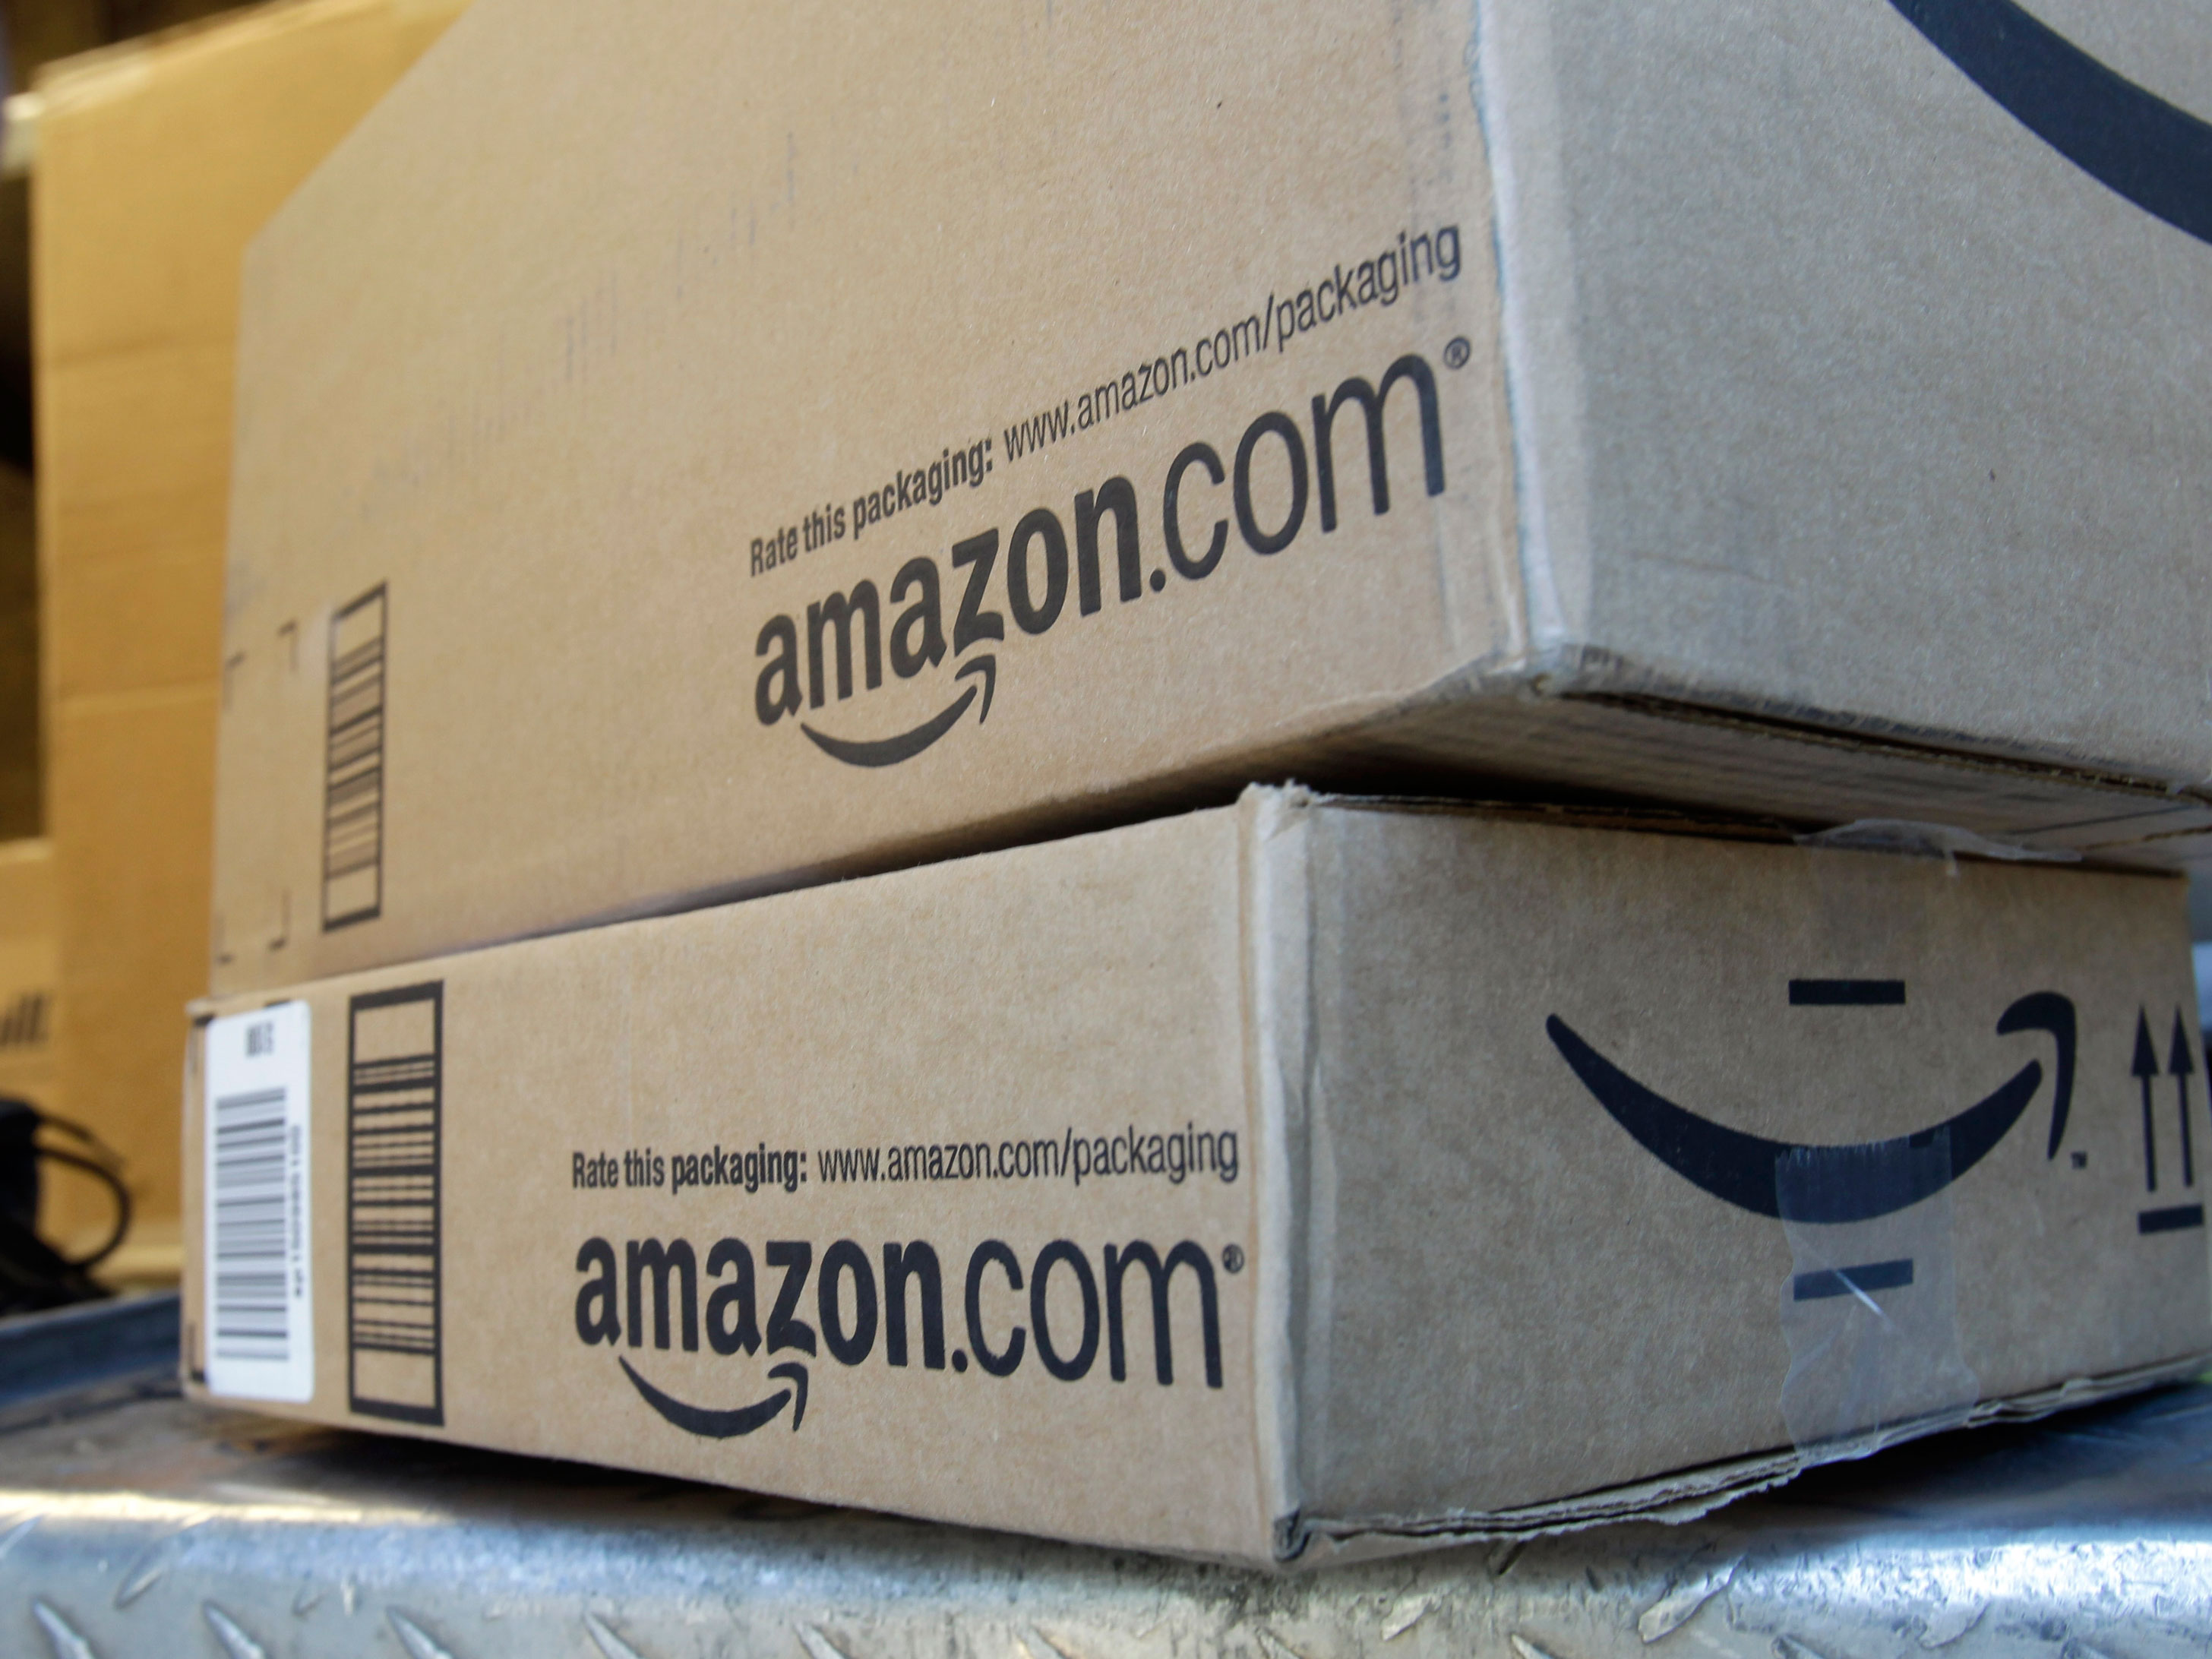 Amazon increases free shipping minimum to $49 - but there is one exception